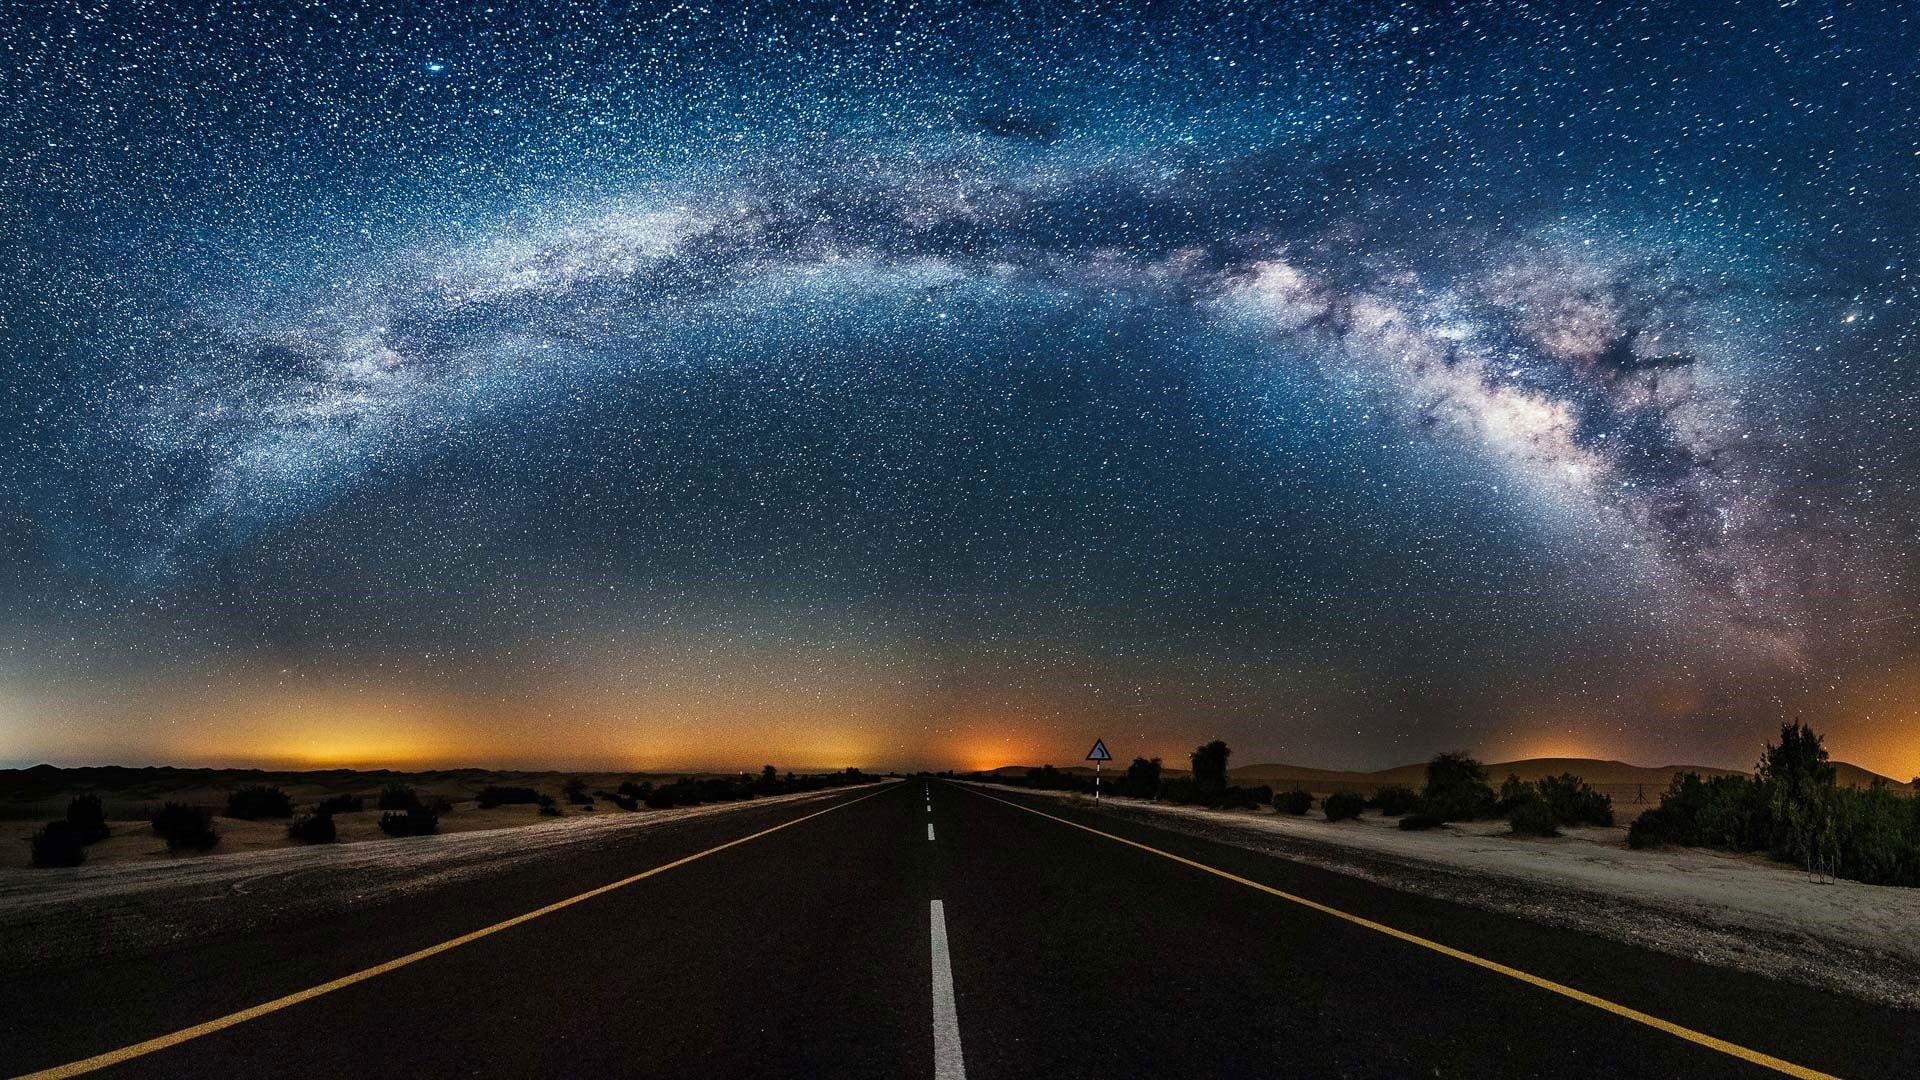 A road in the middle of nowhere with stars above - Road